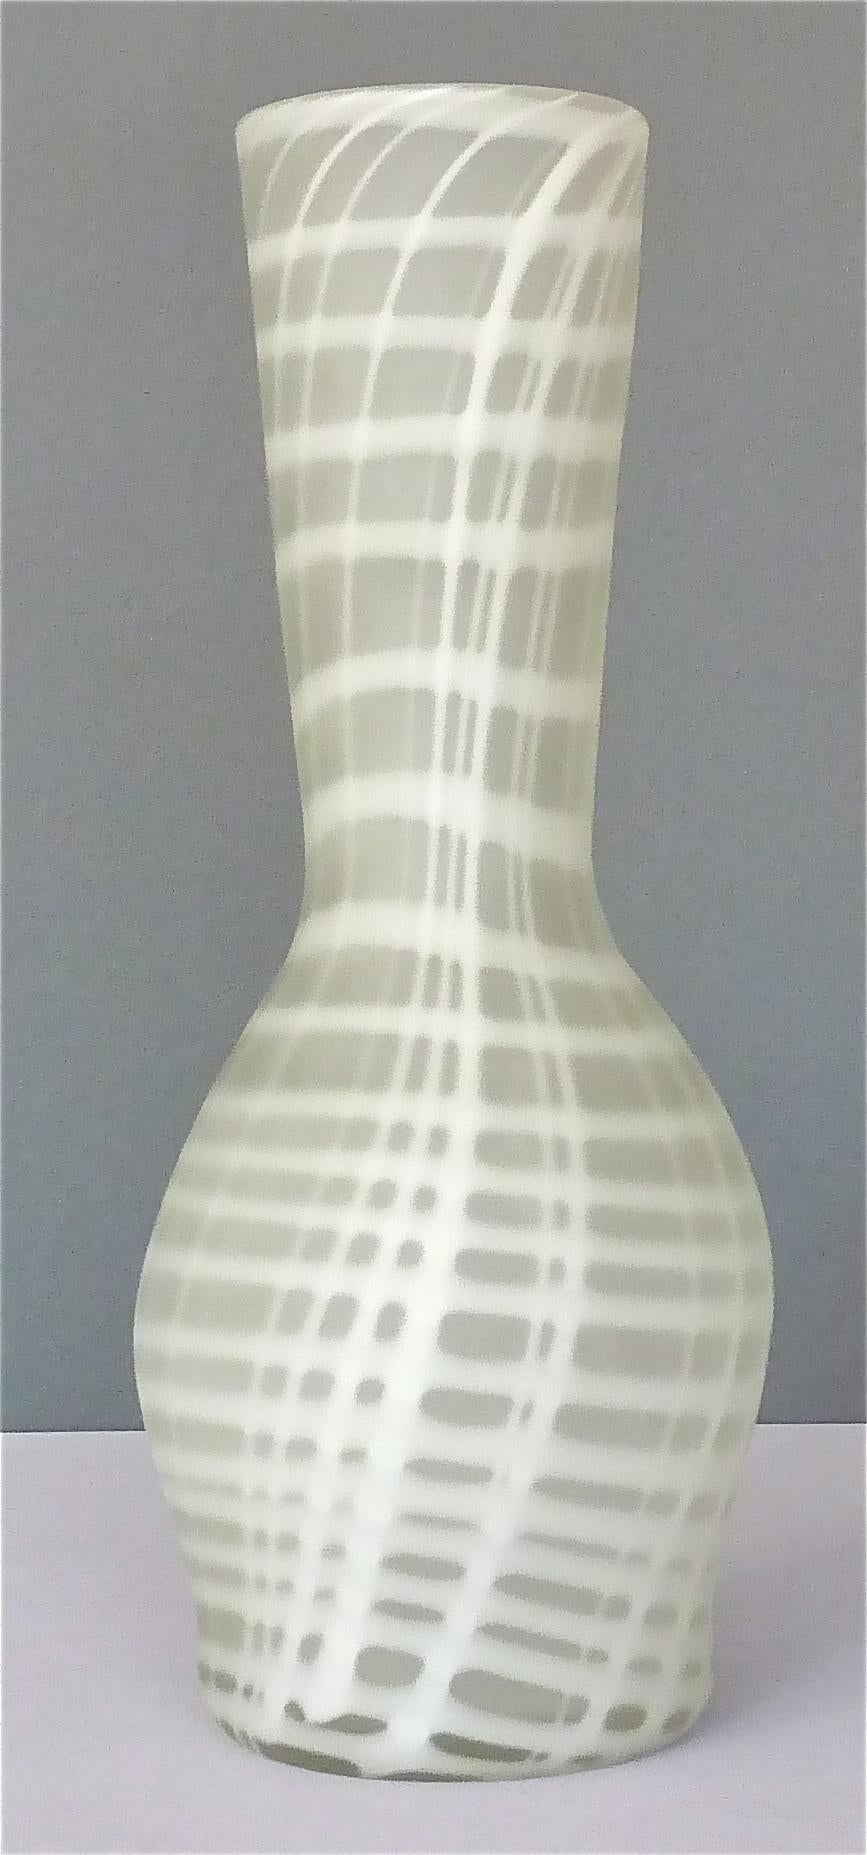 Signed Large Giuliano Tosi Art Glass Vase Satin White Stripes, Italy, 1970s For Sale 6